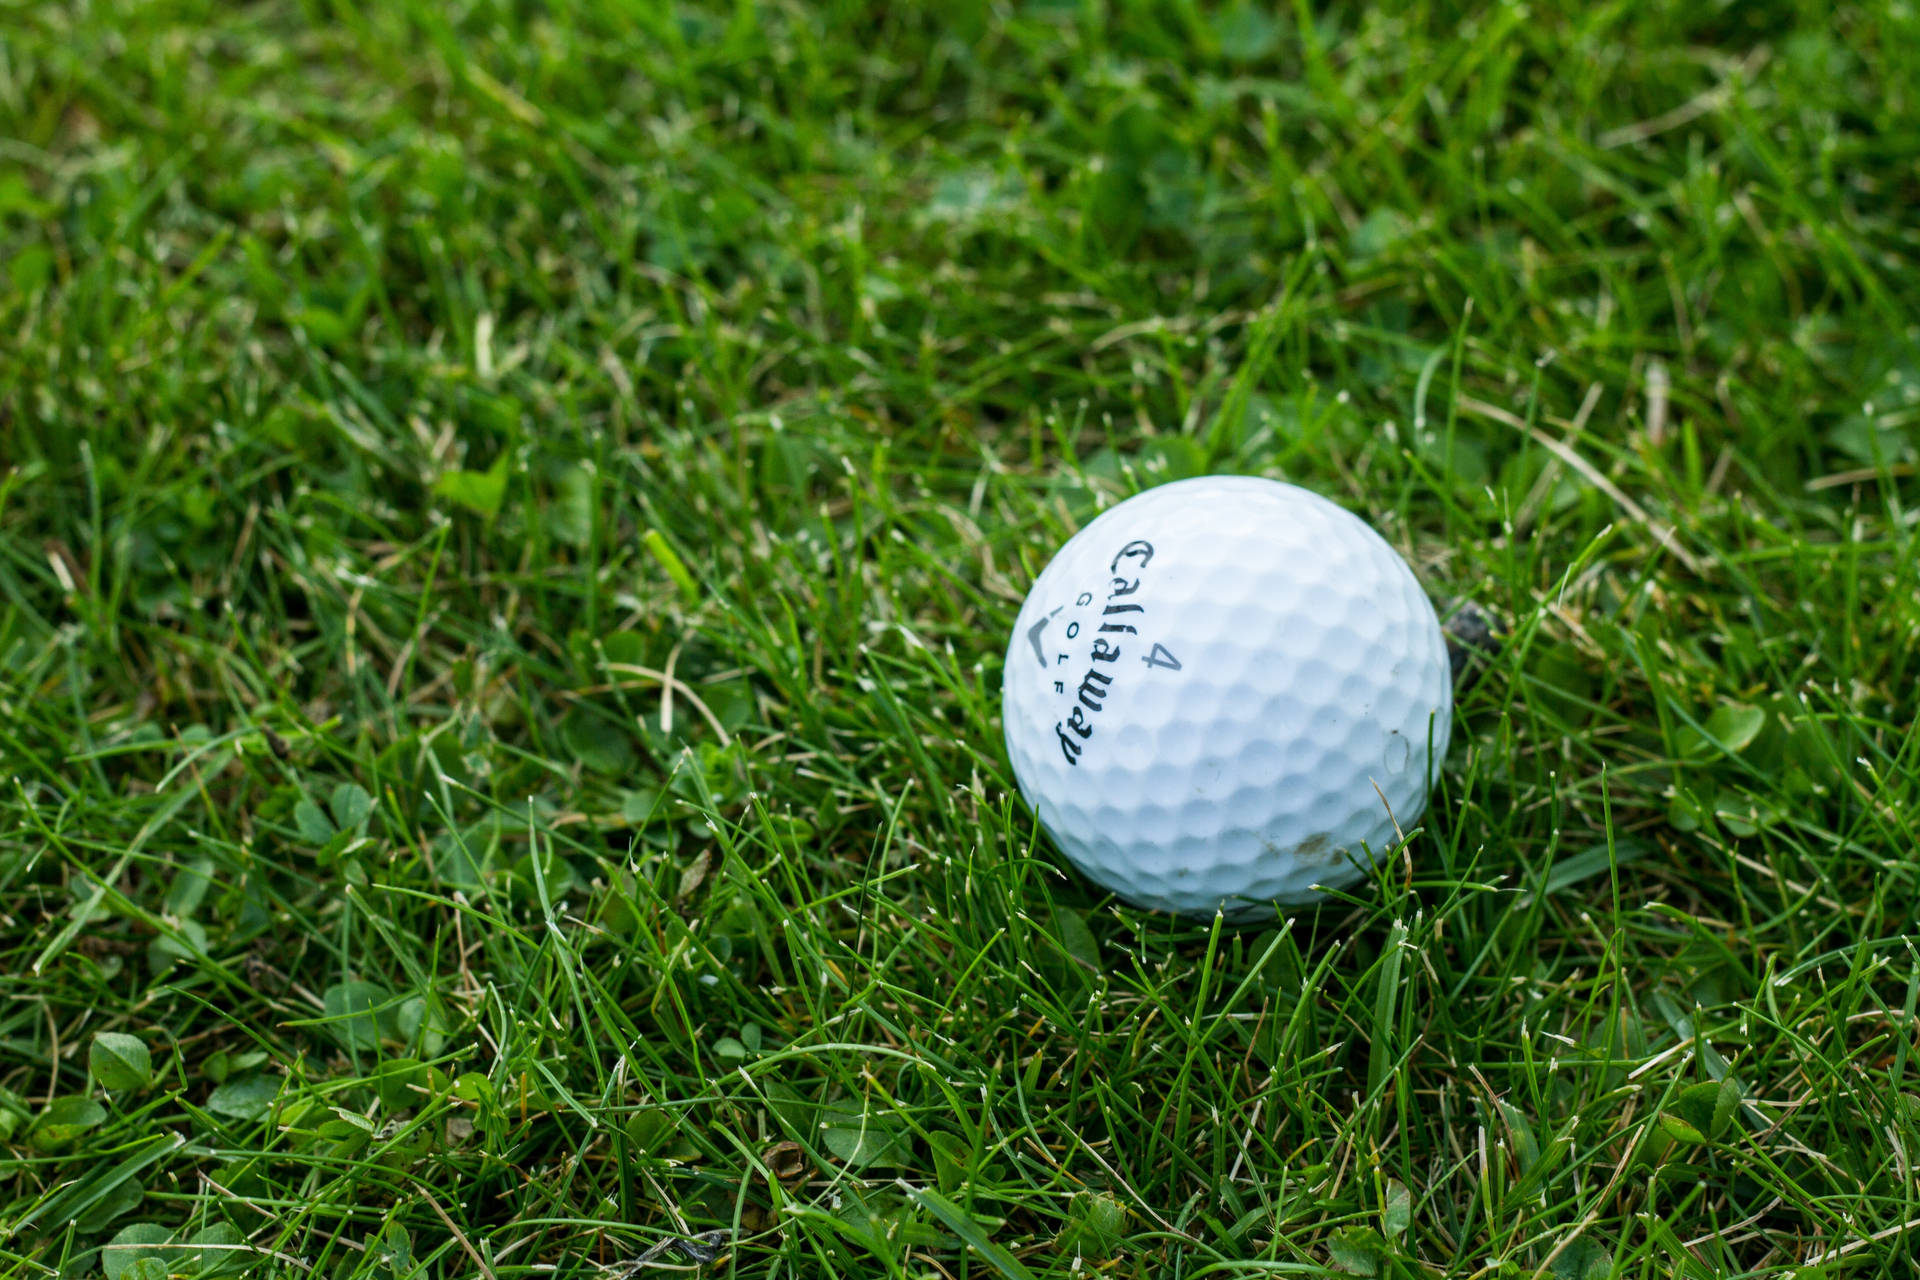 Golf 5184X3456 Wallpaper and Background Image